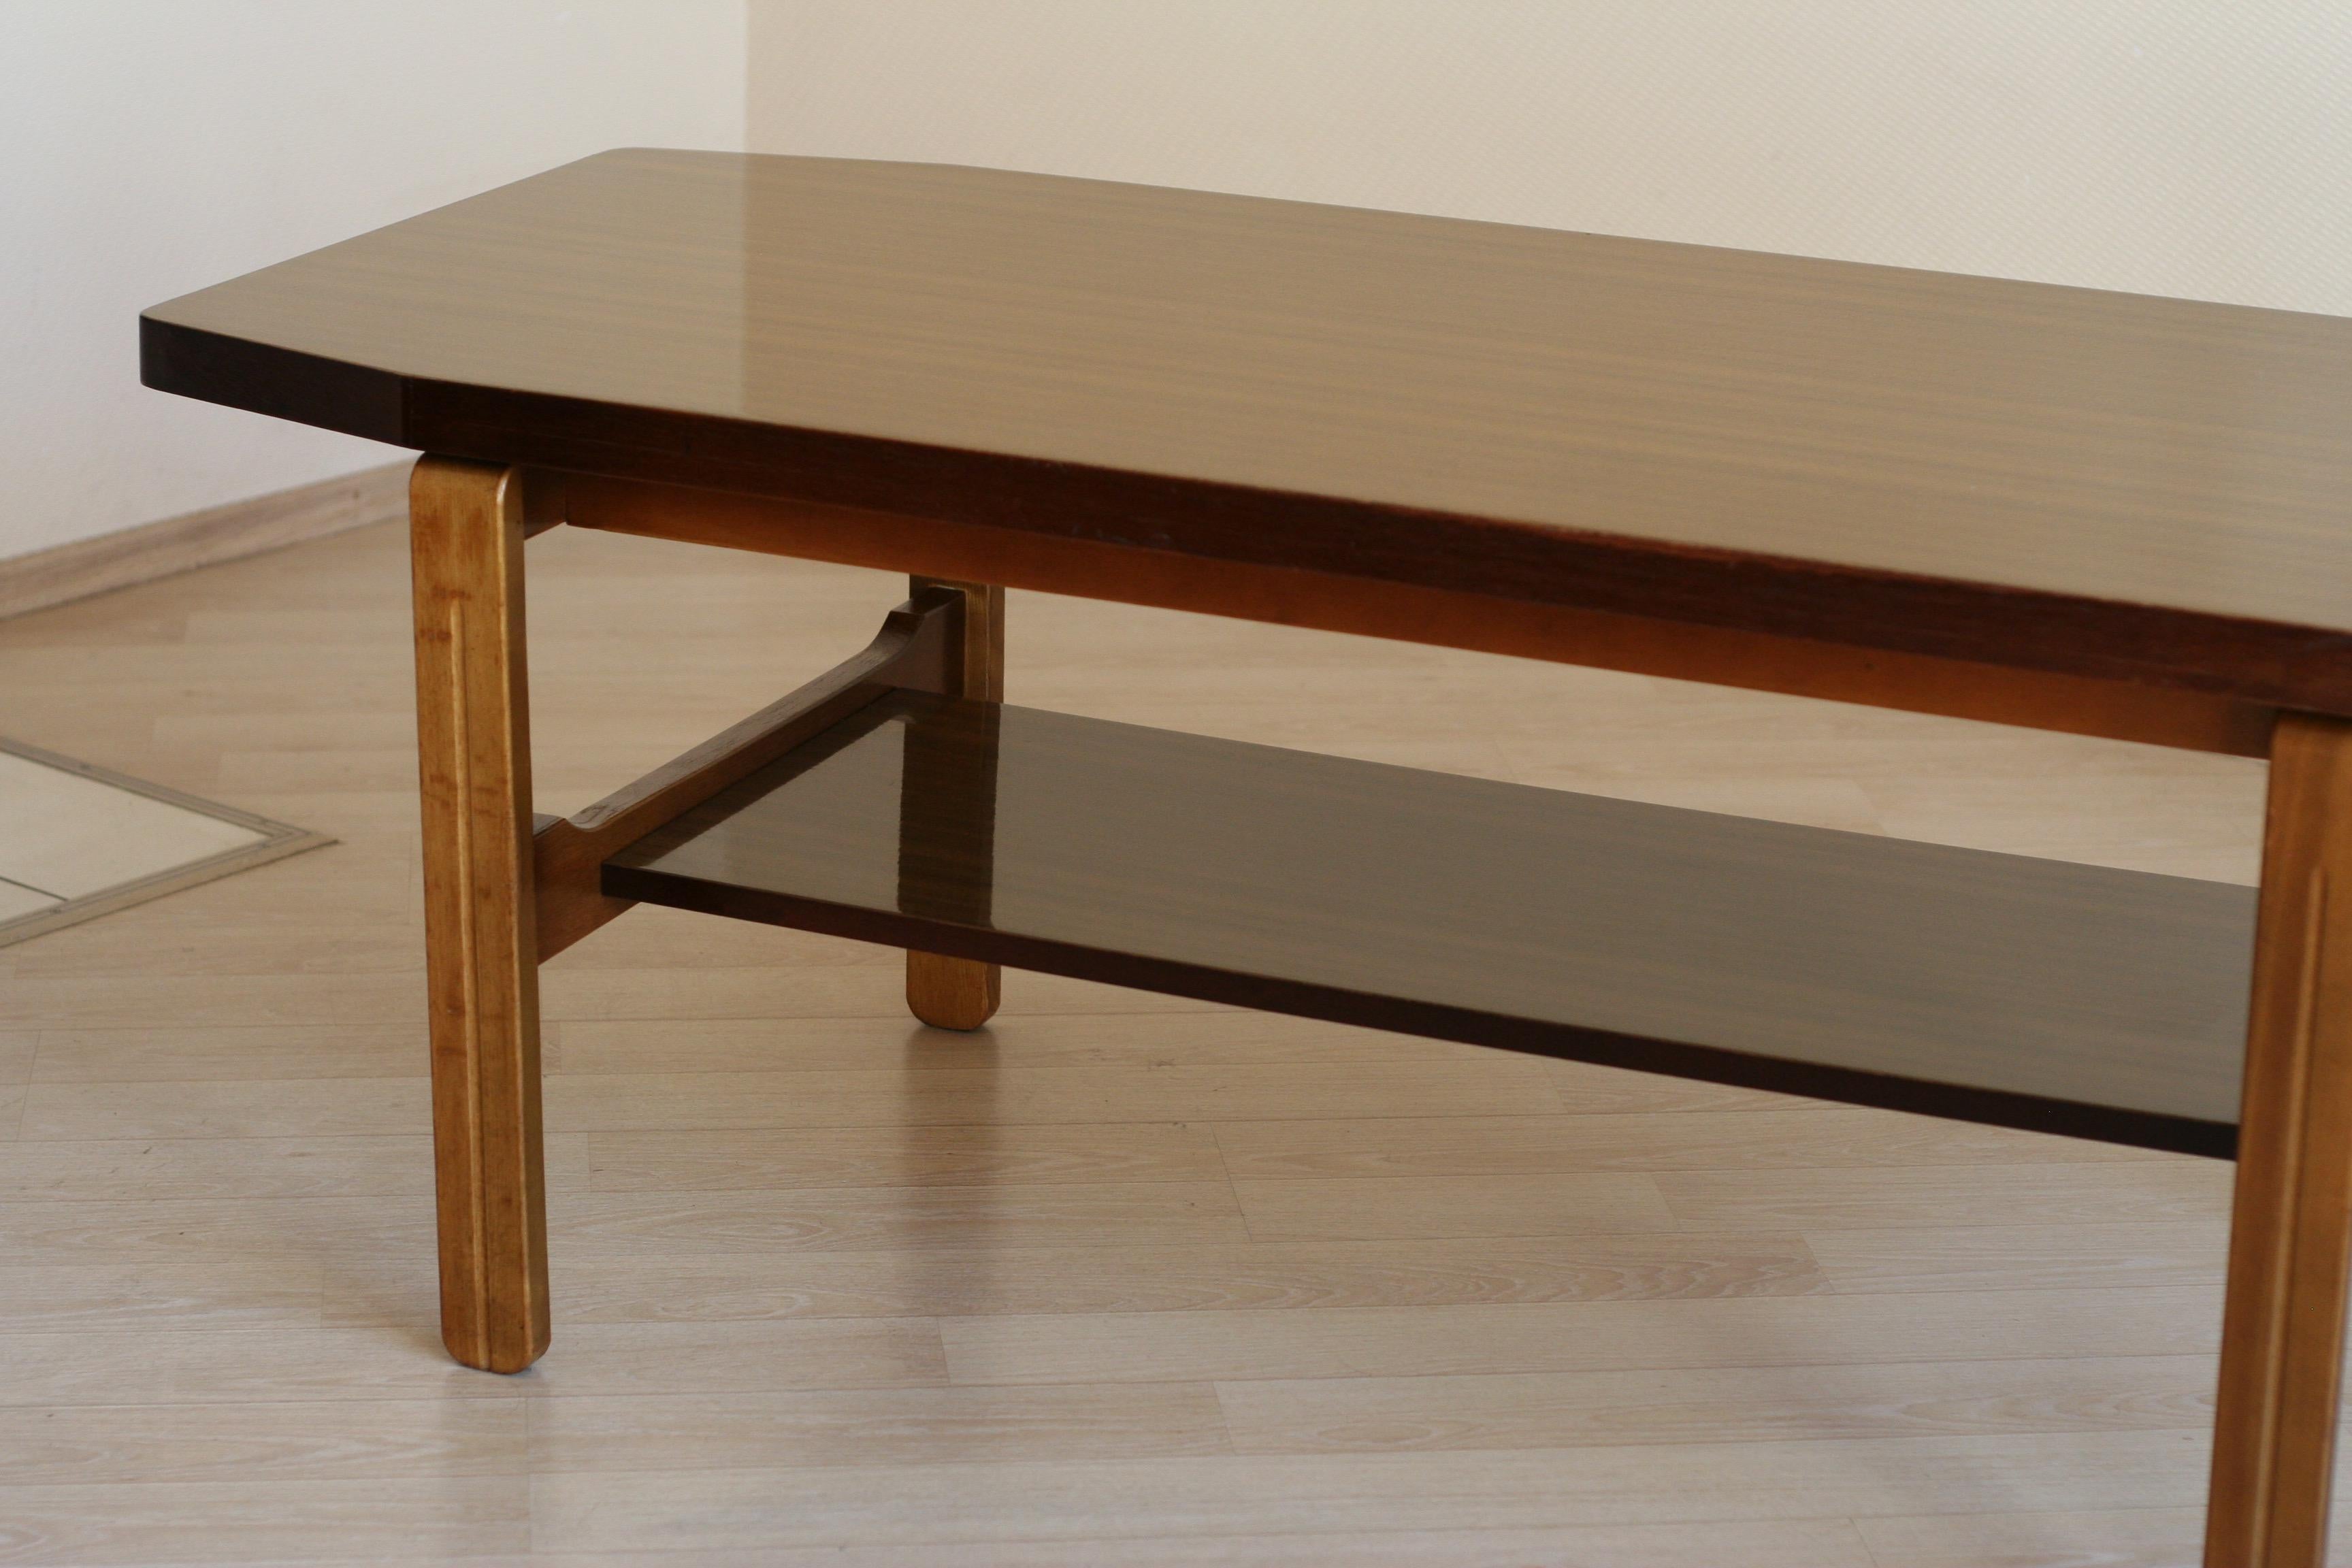 Hardwood Vintage Lithuanian Hexagon Form Wooden Coffee Table, 1970s For Sale